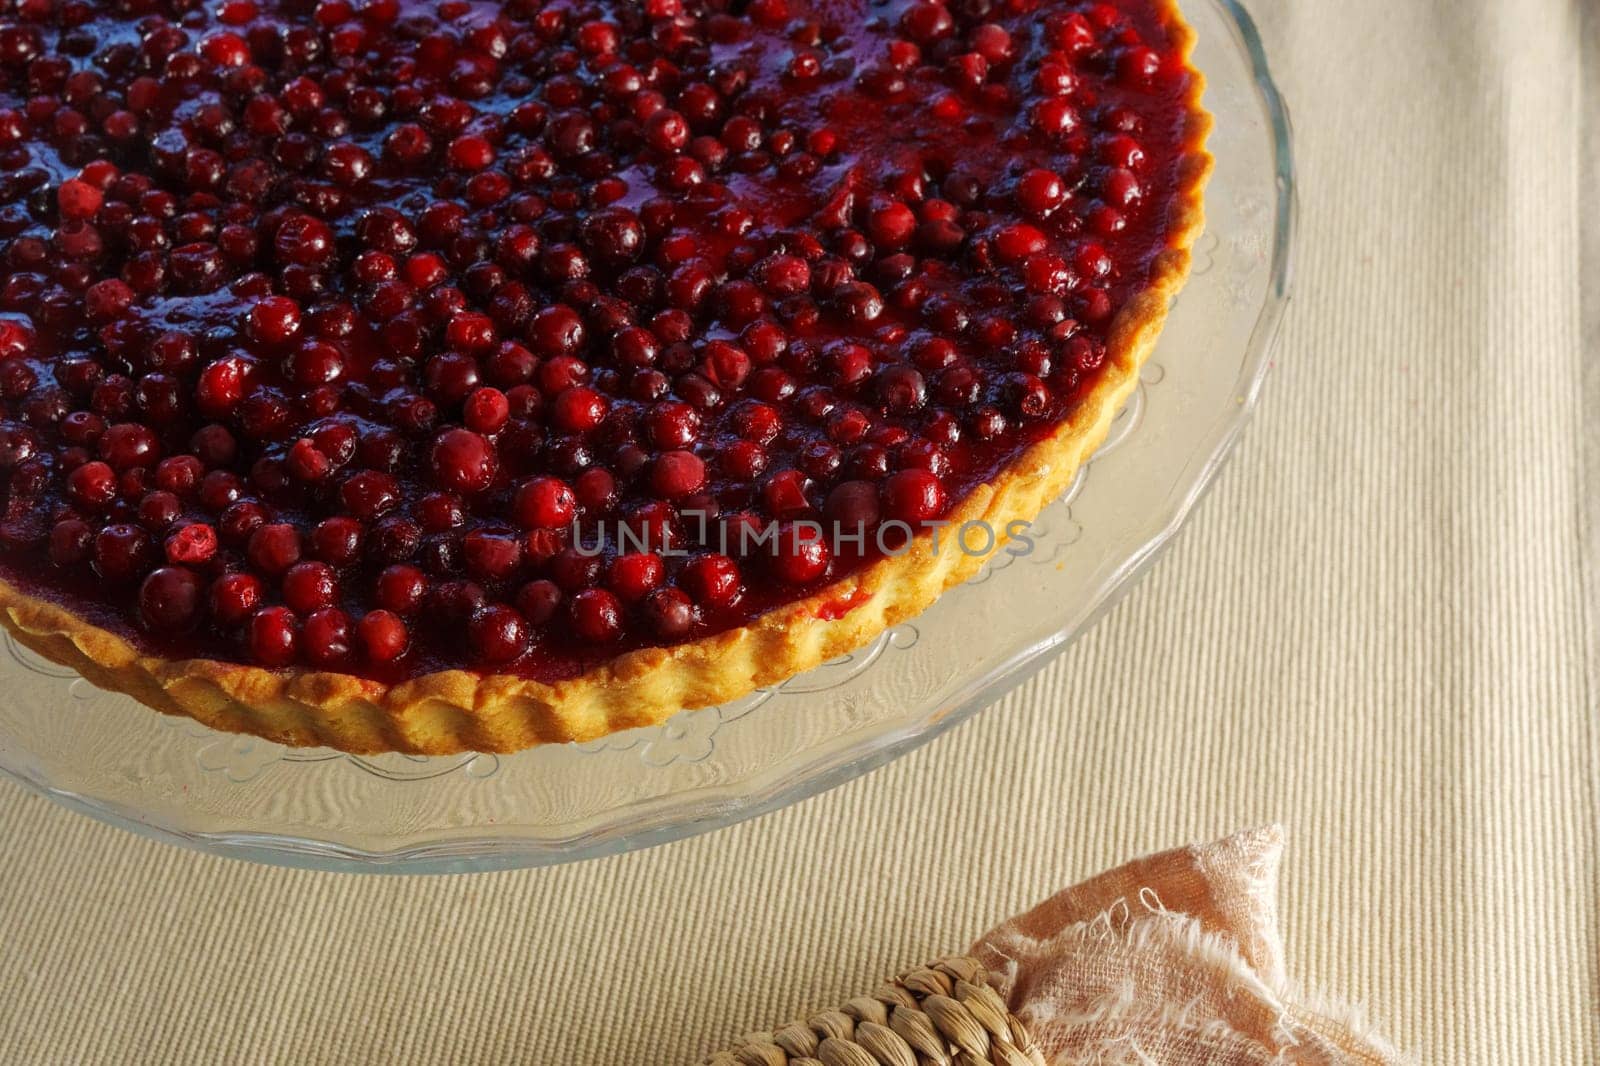 Gleaming Gastronomy: A Luscious Pie Gracefully Resting on a Delicate Glass Plate